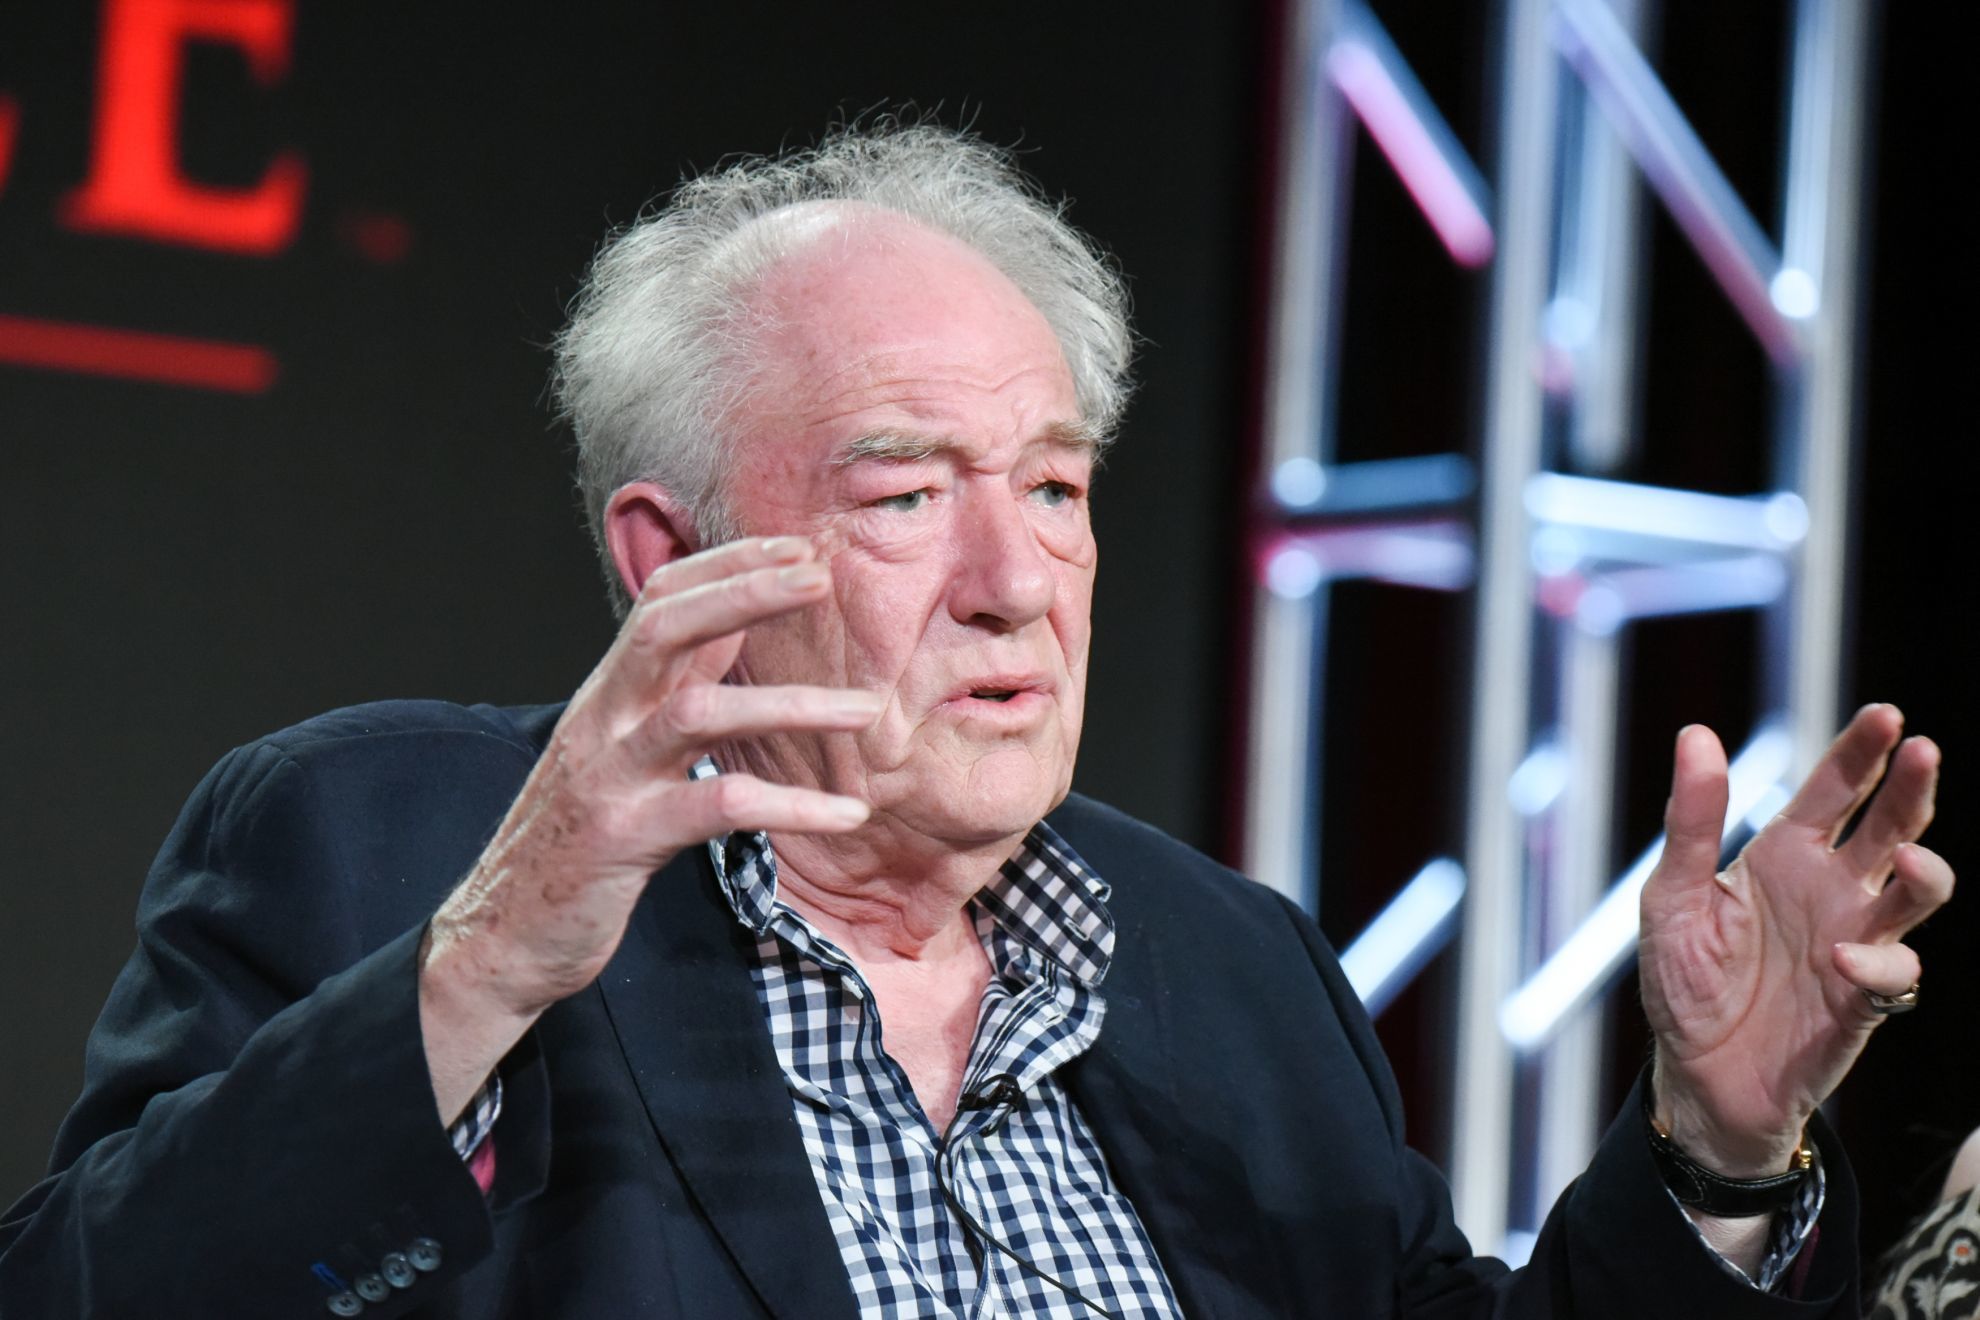 Michael Gambon Cause of Death: How did the 'Harry Potter' actor die?